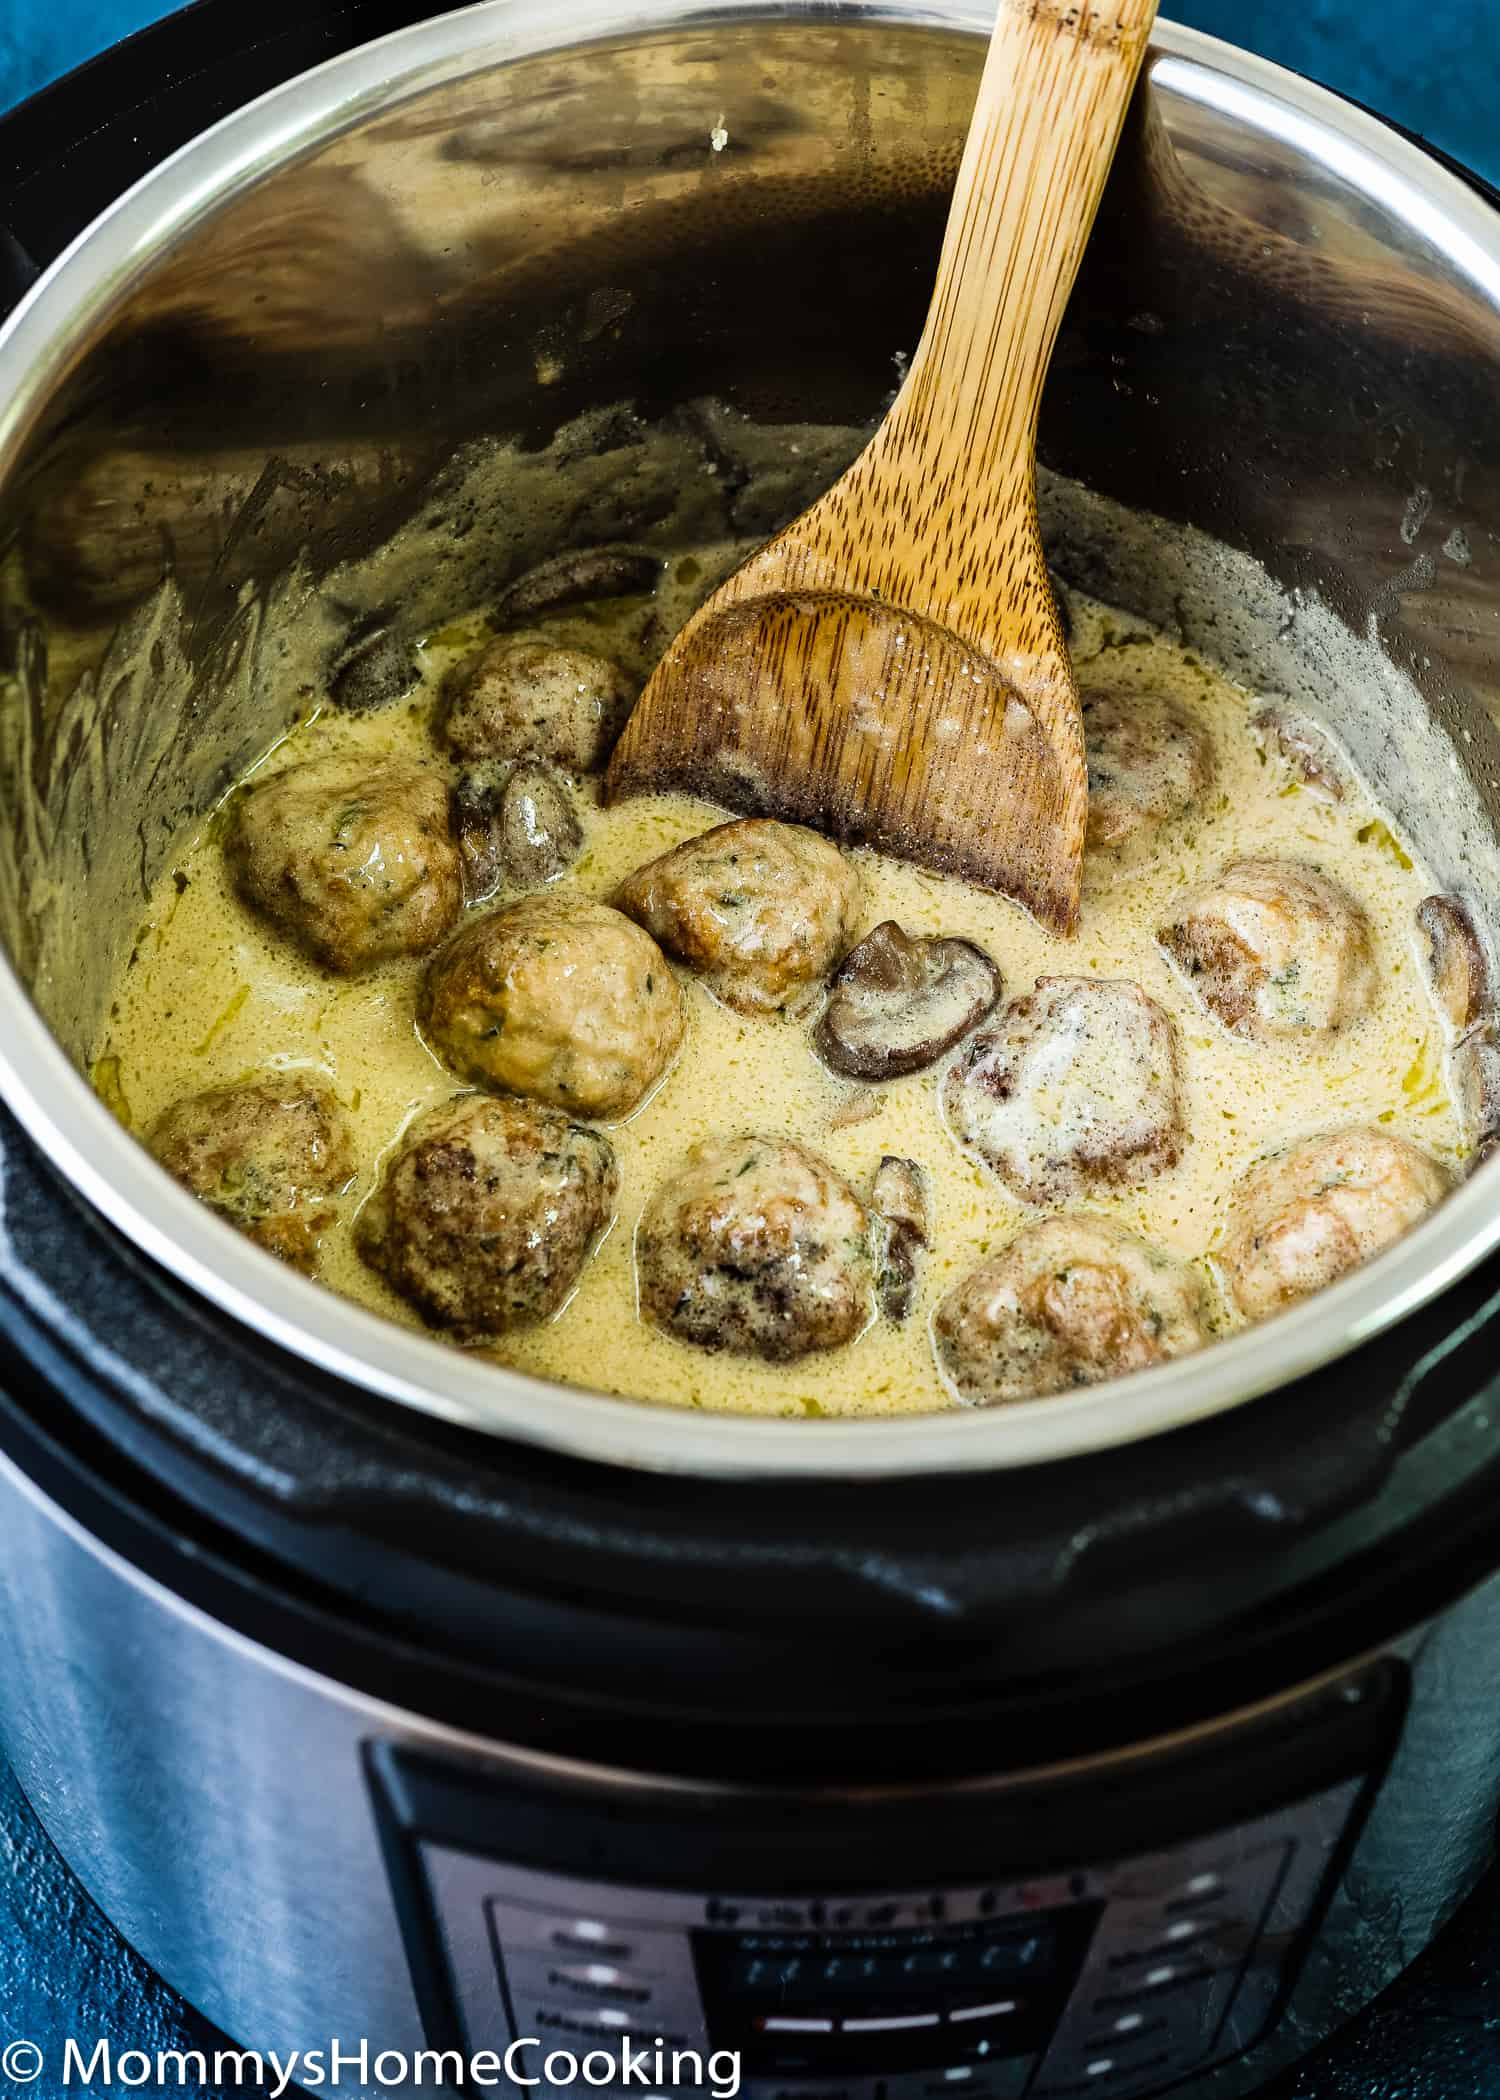 These Easy Instant Pot Stroganoff Meatballs are simply scrumptious! It takes only 30 minutes to make this family favorite dish. Made from scratch, NO canned stuff. https://mommyshomecooking.com